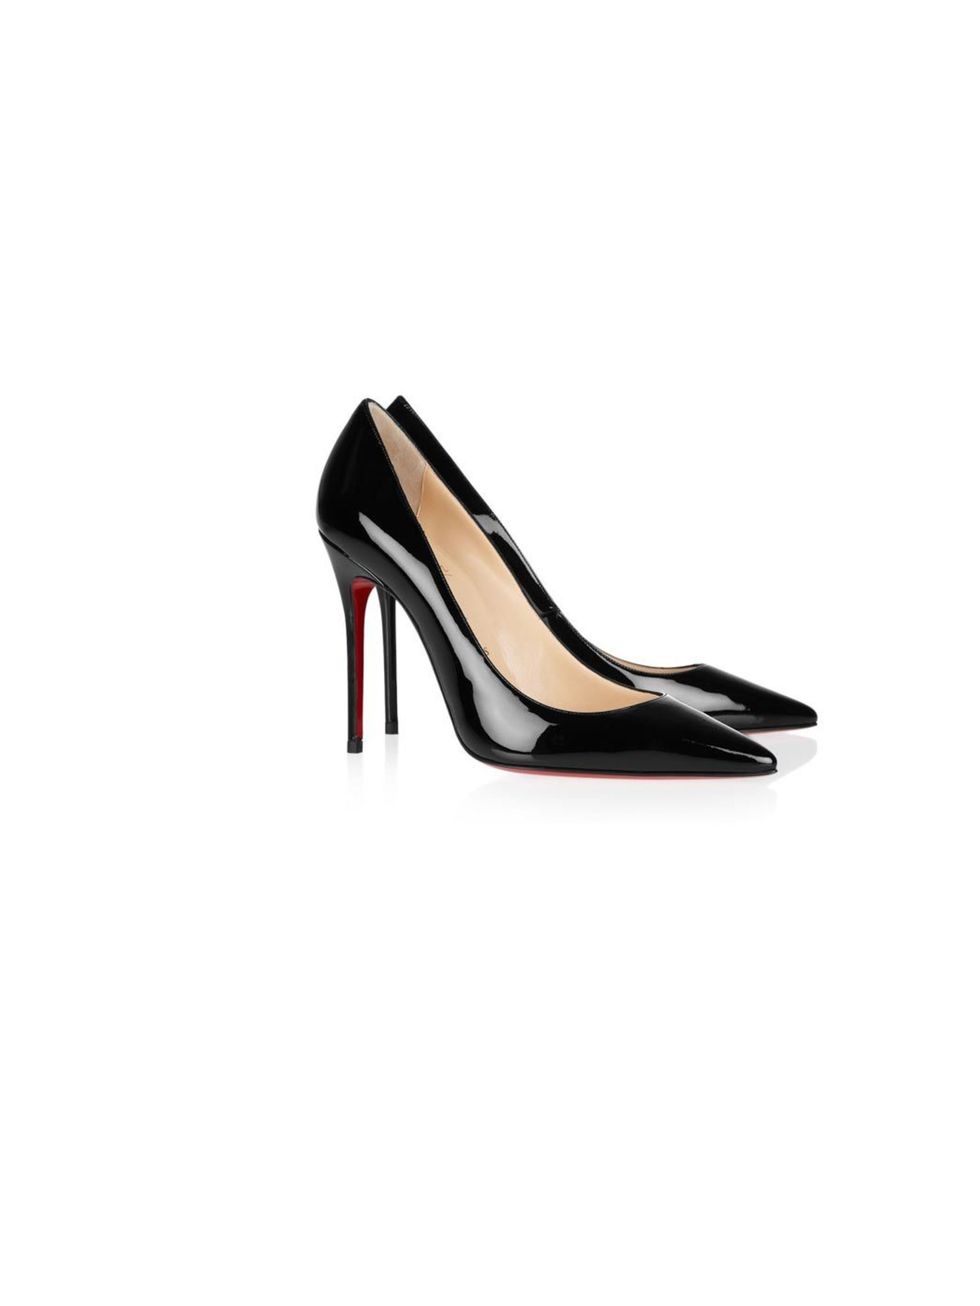 <p>Christian Louboutin 'Decollete' patent-leather pumps, £395, For stockists call 0207 491 0033</p>